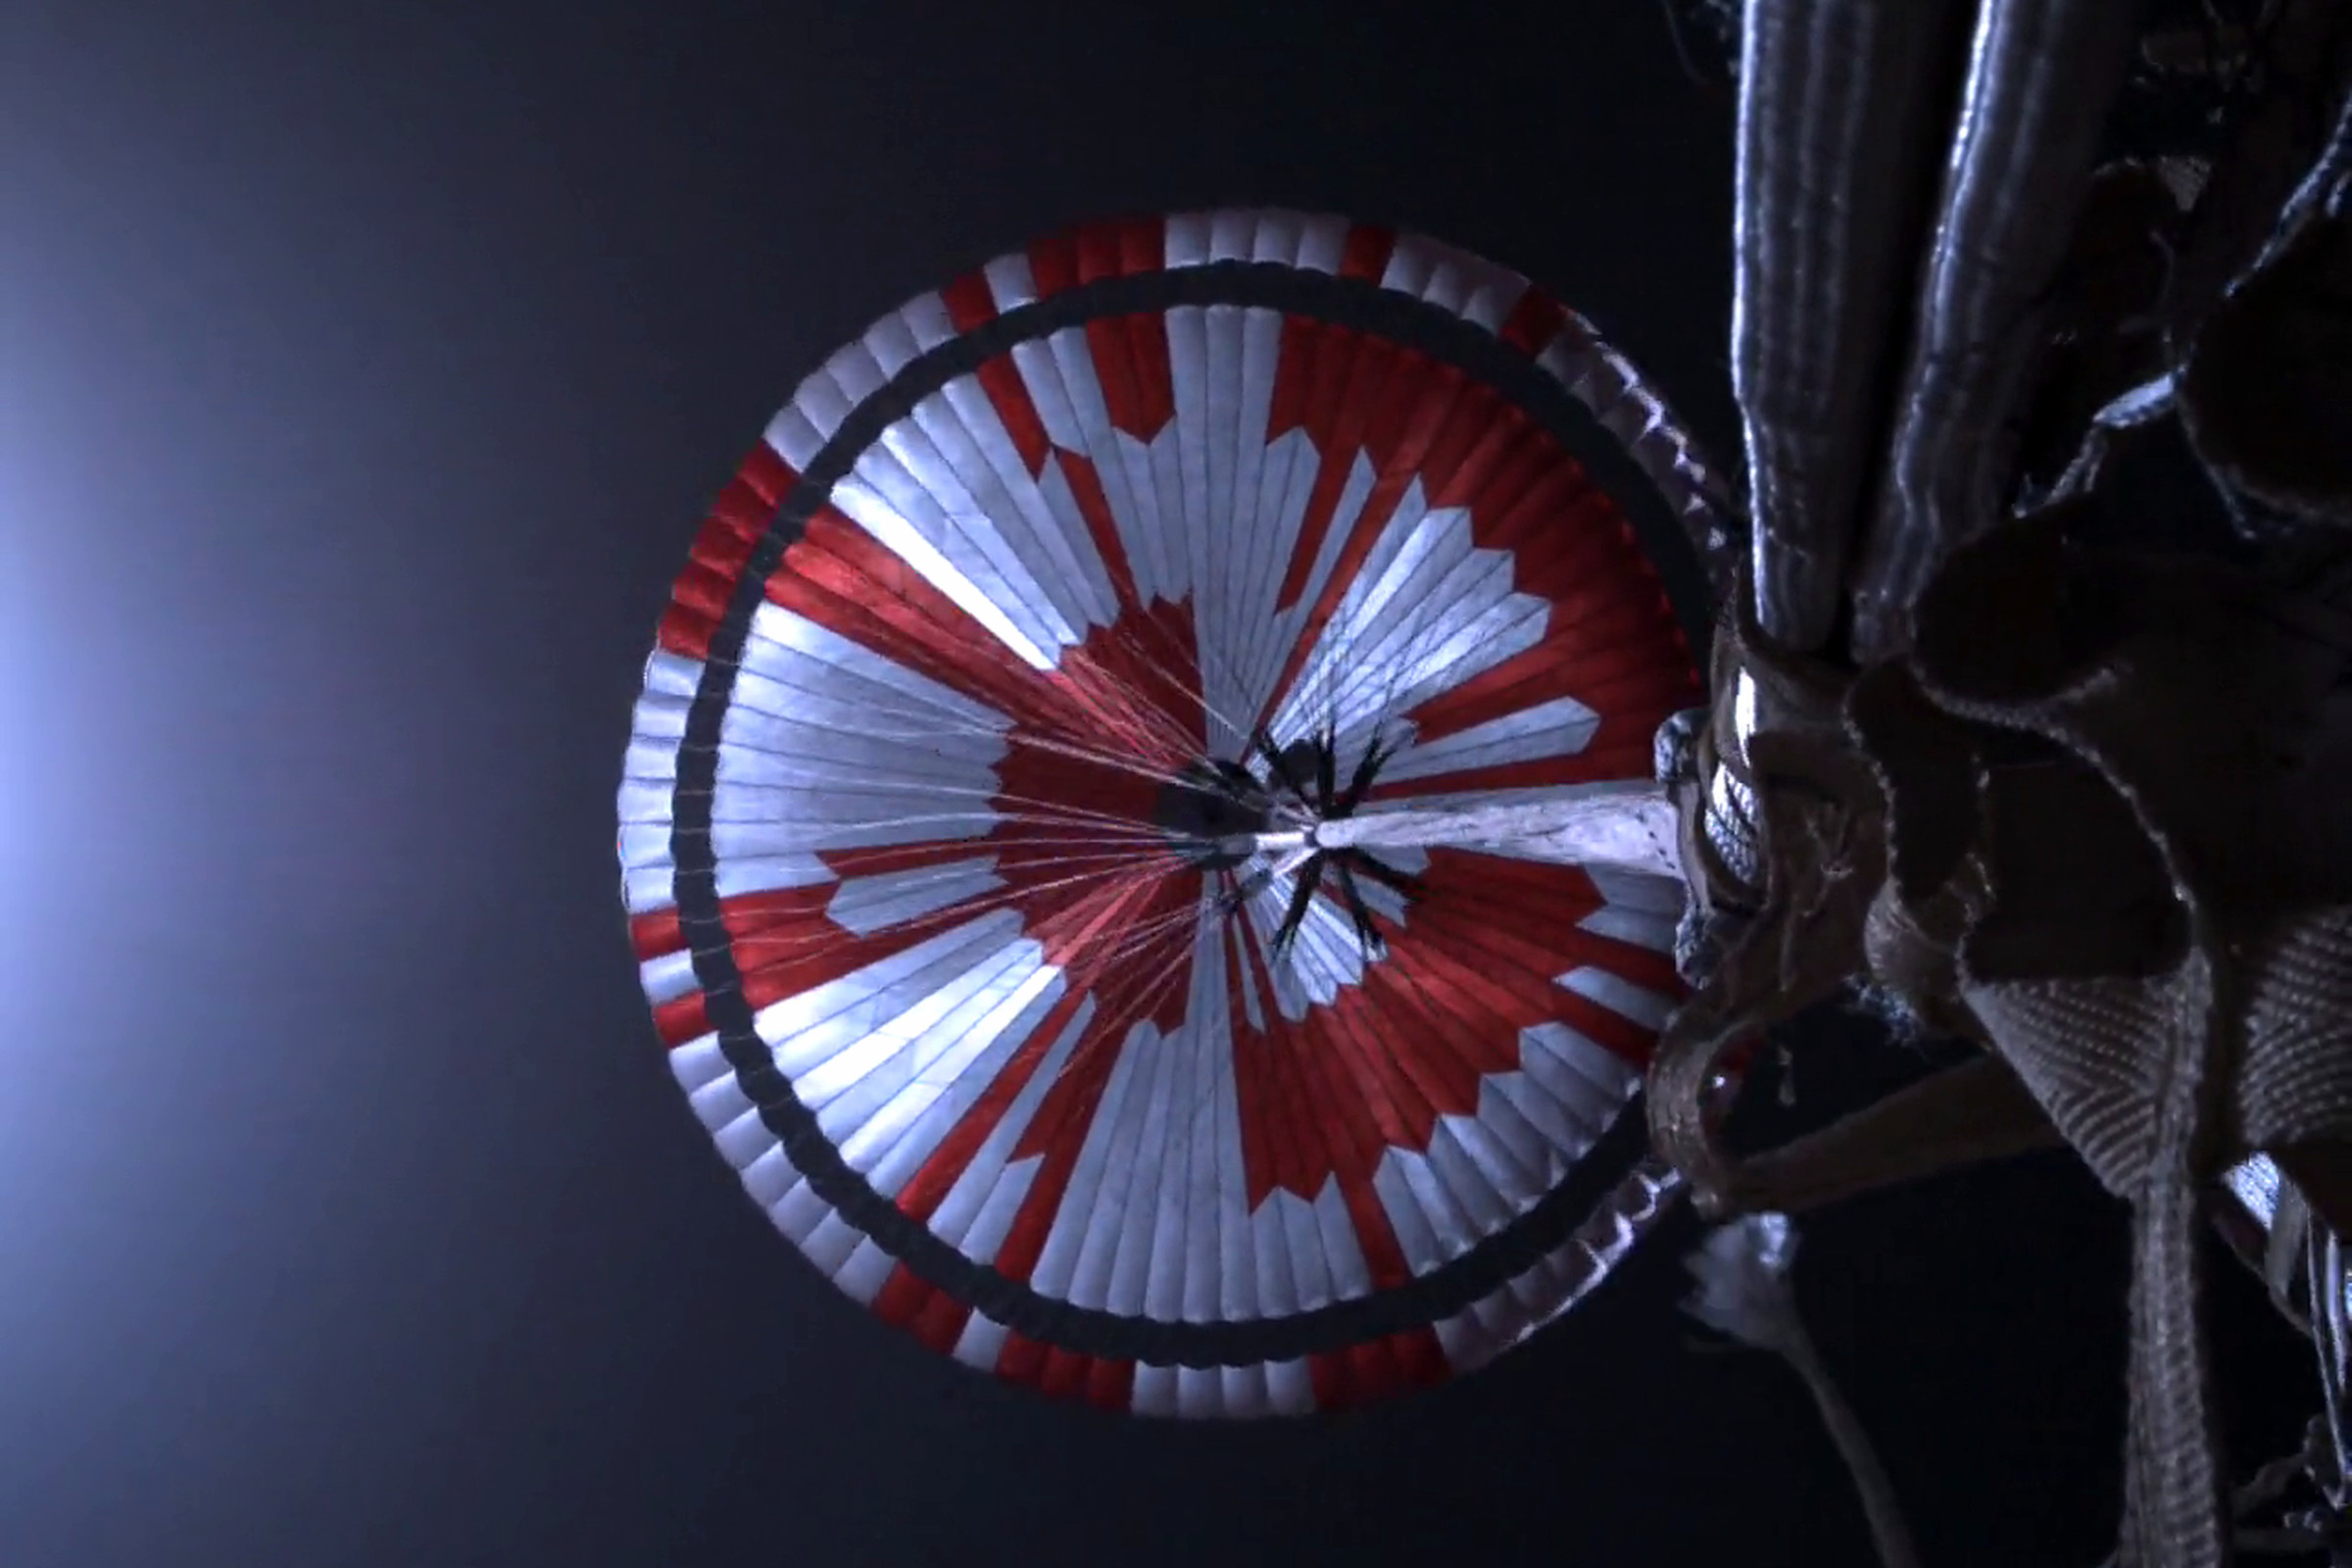 The view of NASA’s Perseverance rover looking up at its parachute, which reads “Dare Mighty Things” in a hidden code, while zooming through the Martian atmosphere before landing.